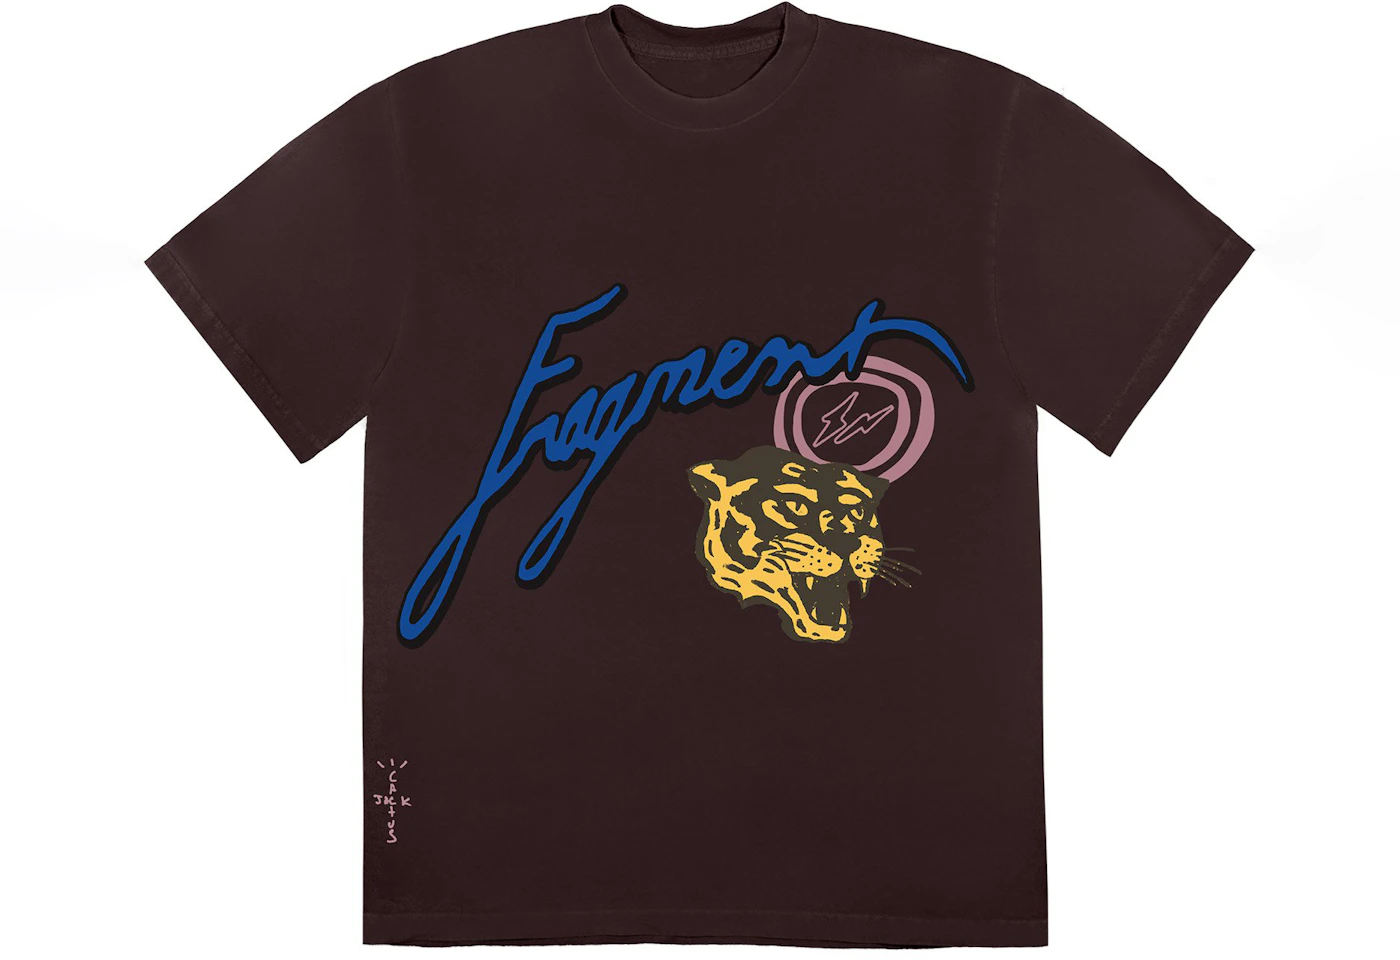 Cactus Jack for fragment manifest shirt, hoodie, sweater